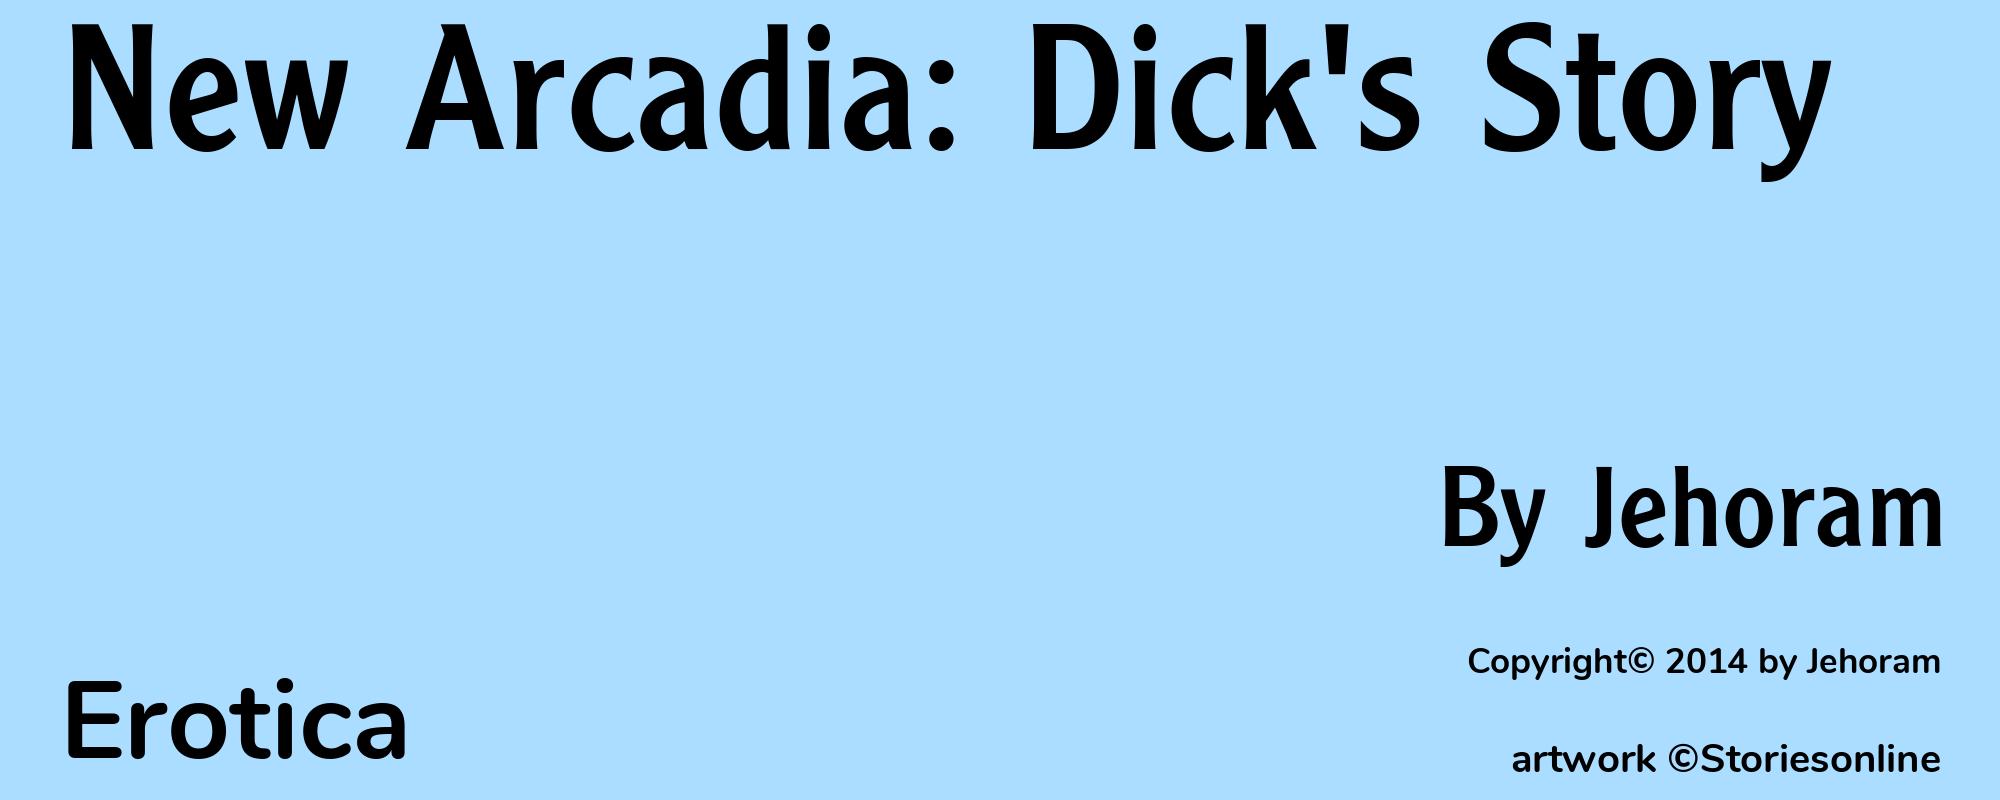 New Arcadia: Dick's Story - Cover